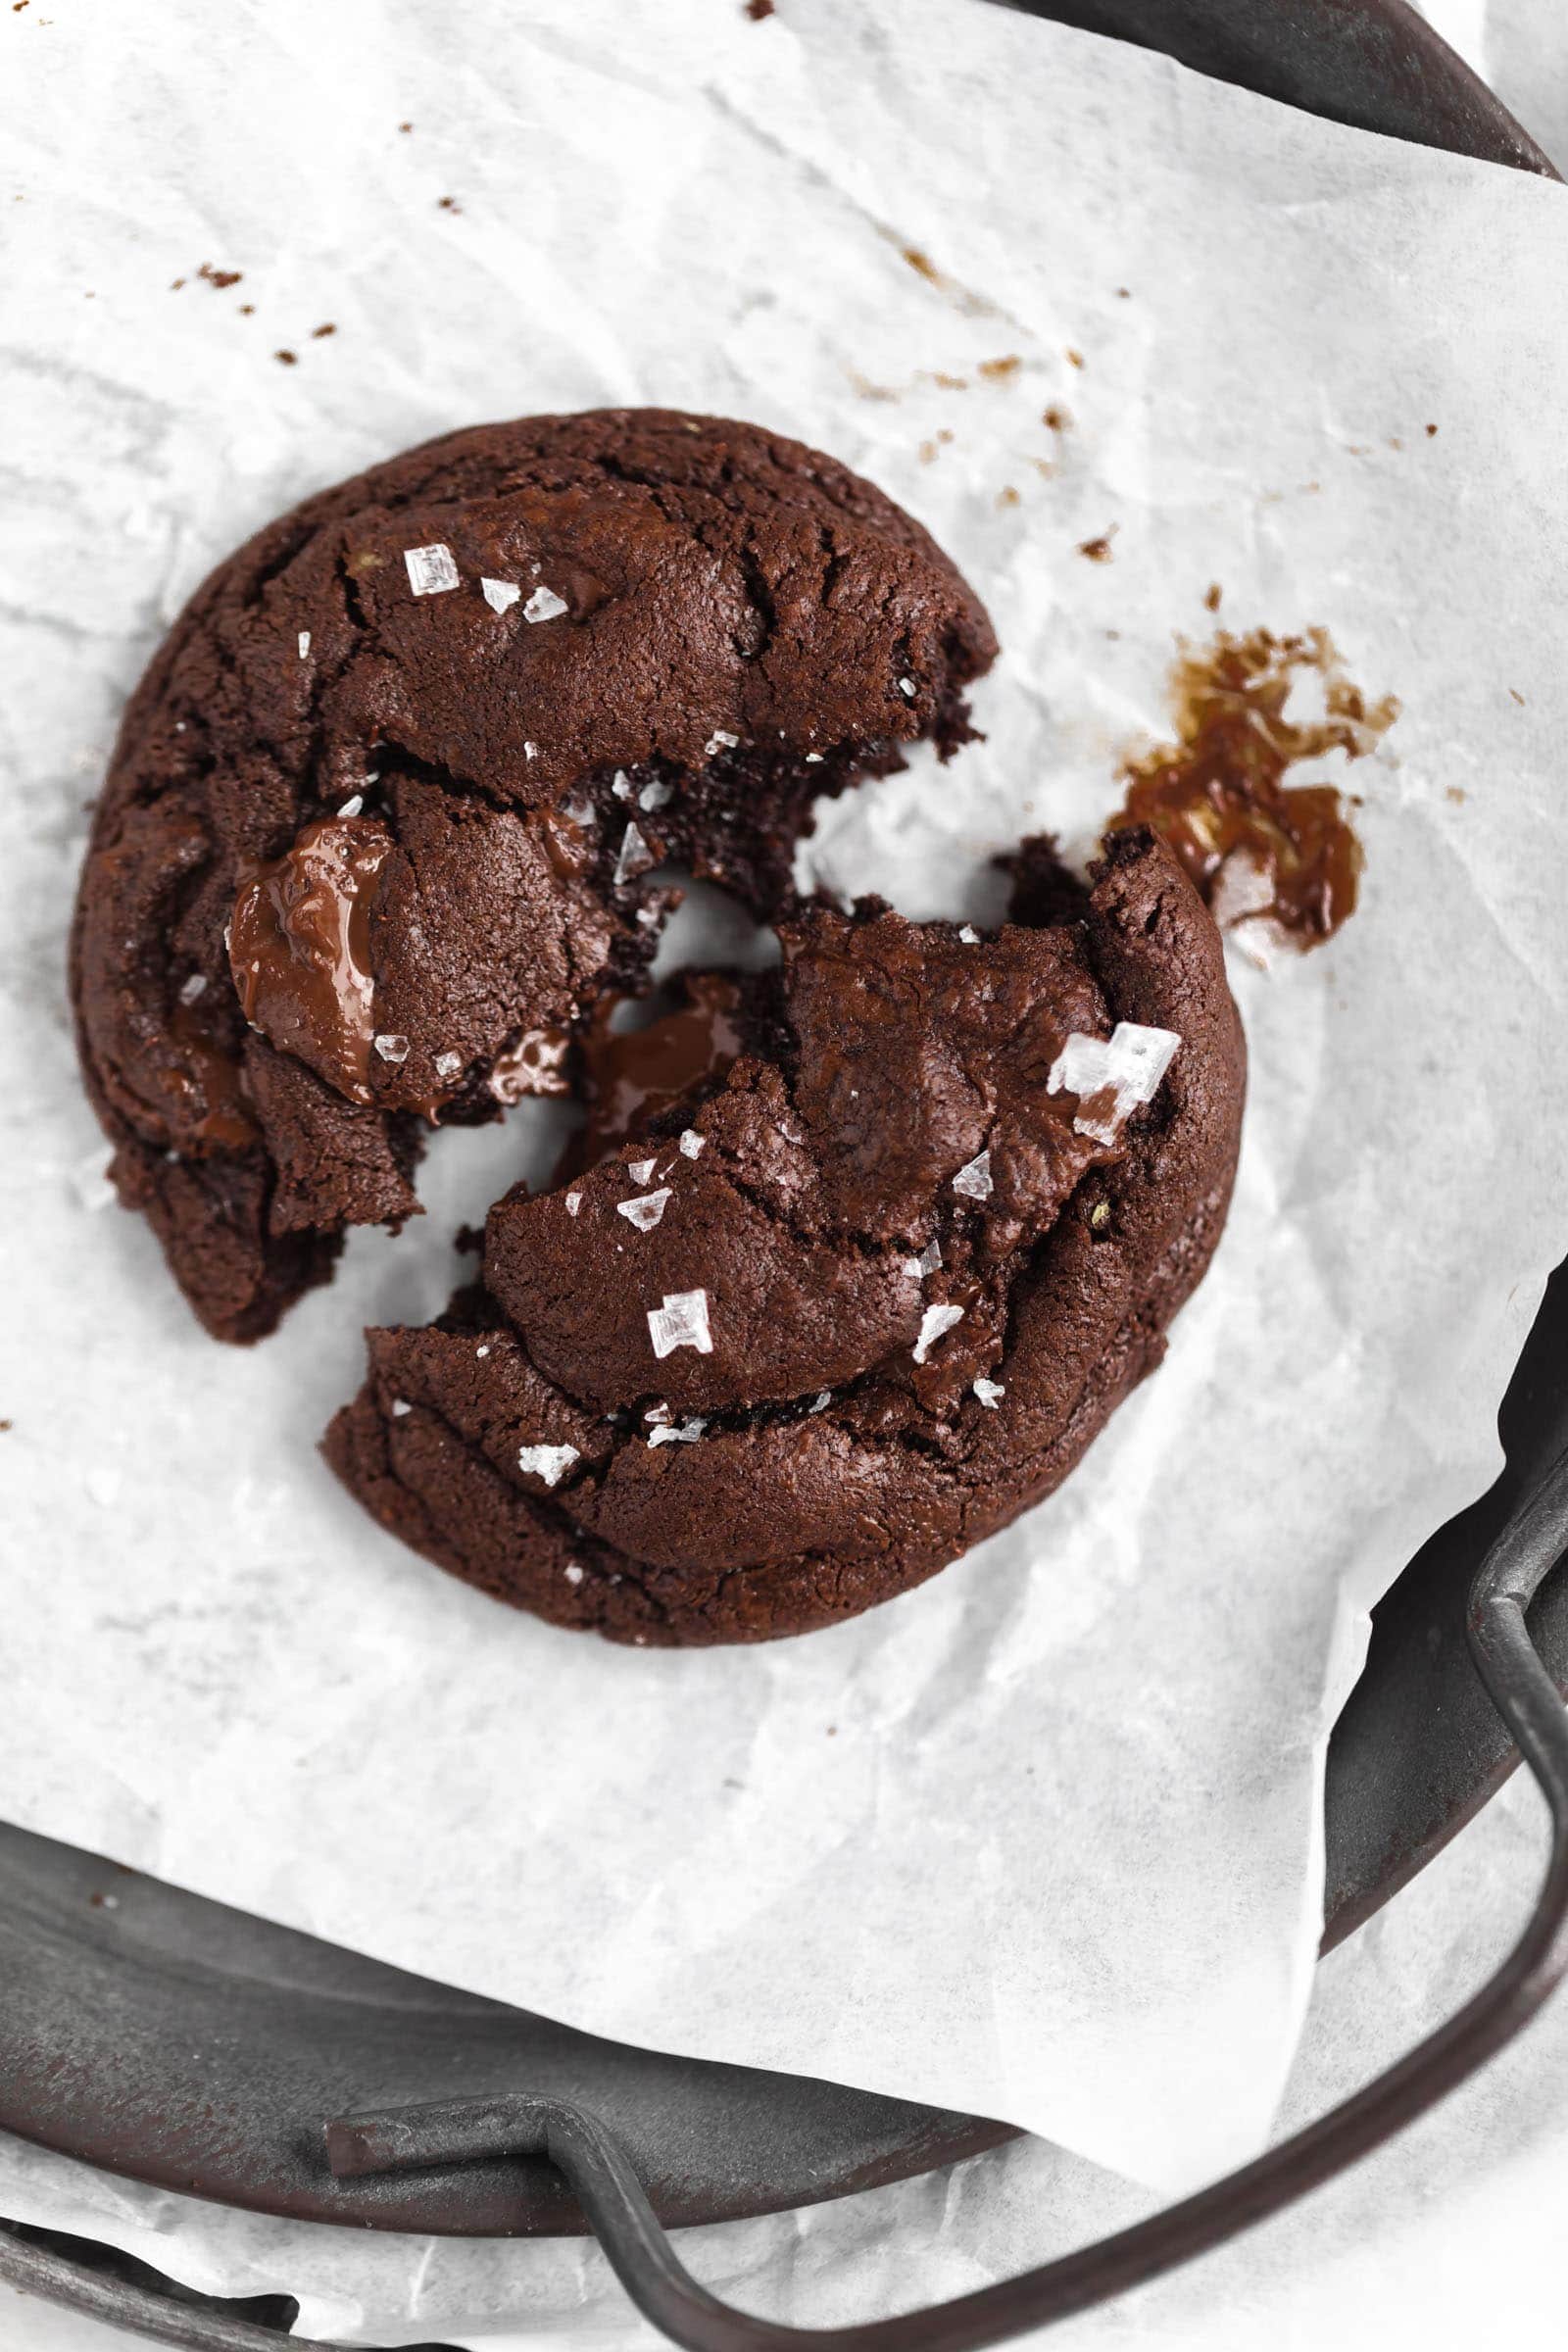 https://bromabakery.com/wp-content/uploads/2022/03/Double-Chocolate-Cookies-6.jpg